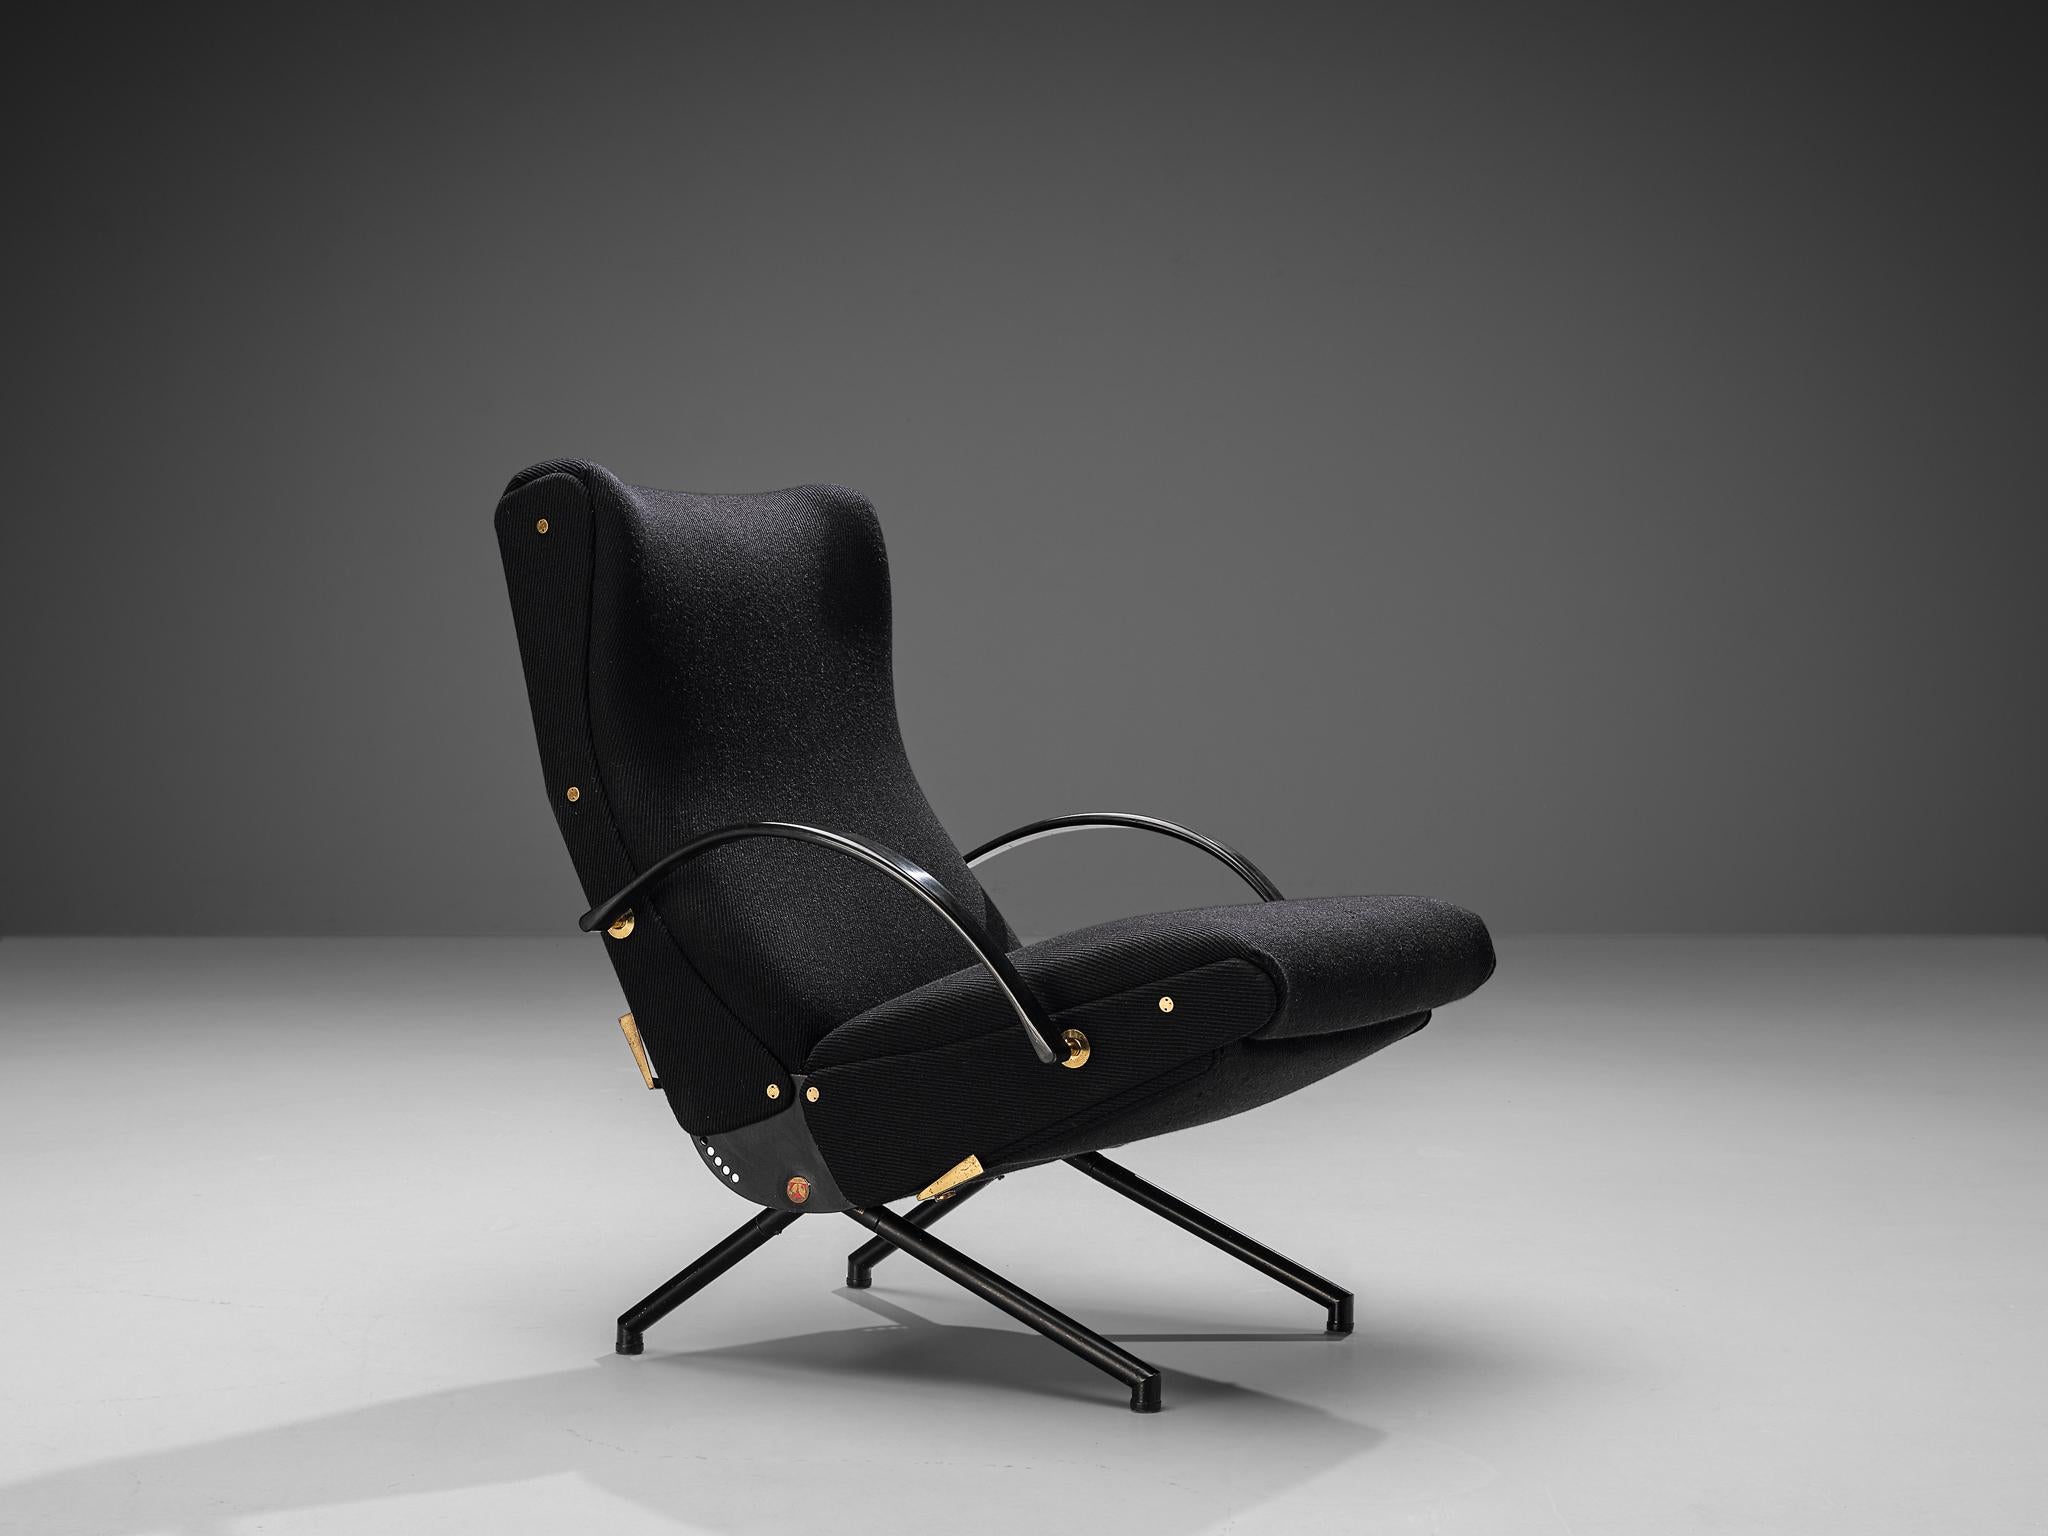 Osvaldo Borsani for Tecno, lounge chair, model P40, original black fabric, metal, Italy, 1955.

This lounge chair has been the result of the relentless search for an armchair that facilitated maximum relaxation. This search was in line with other